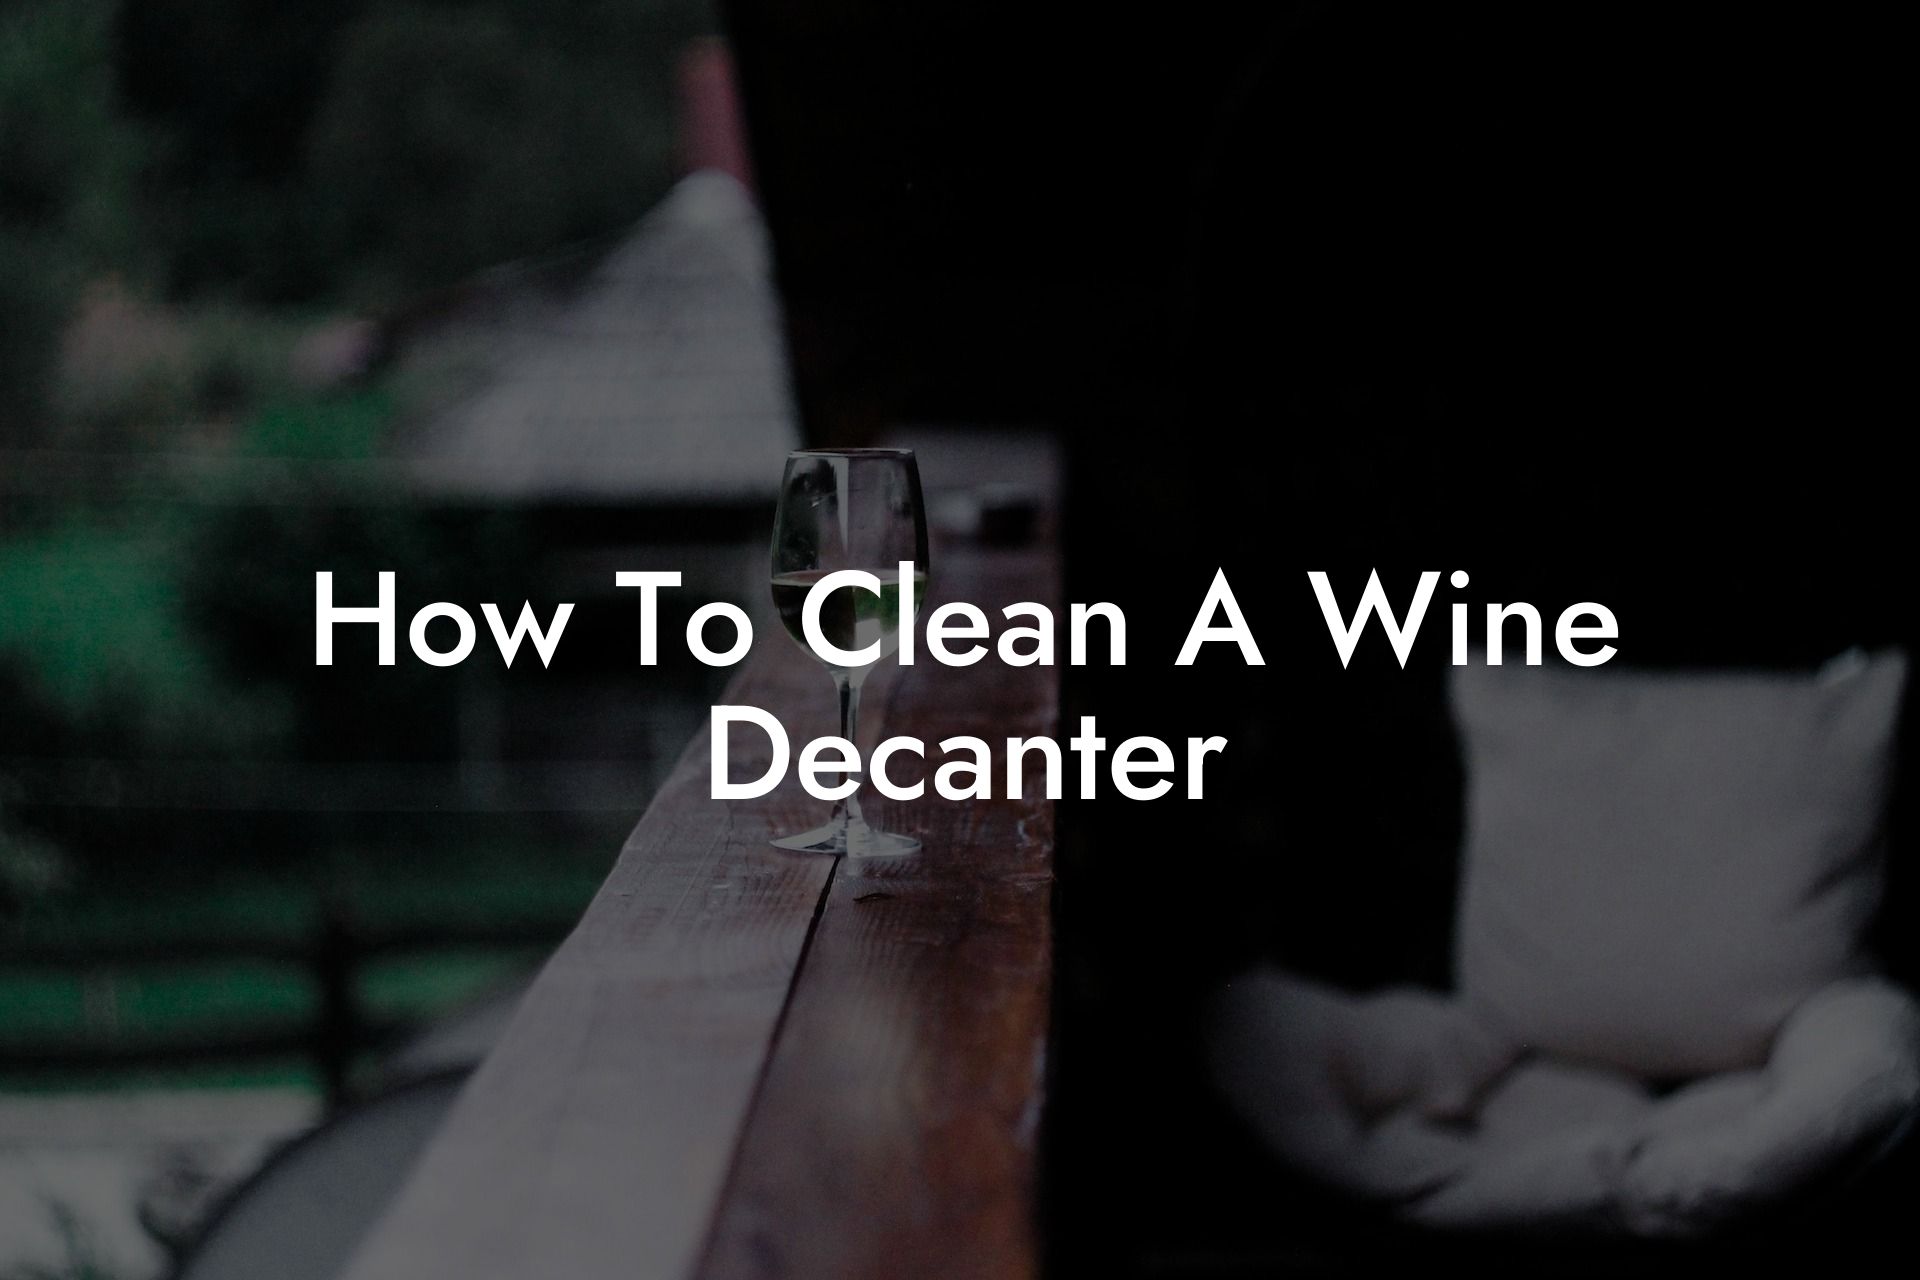 How To Clean A Wine Decanter